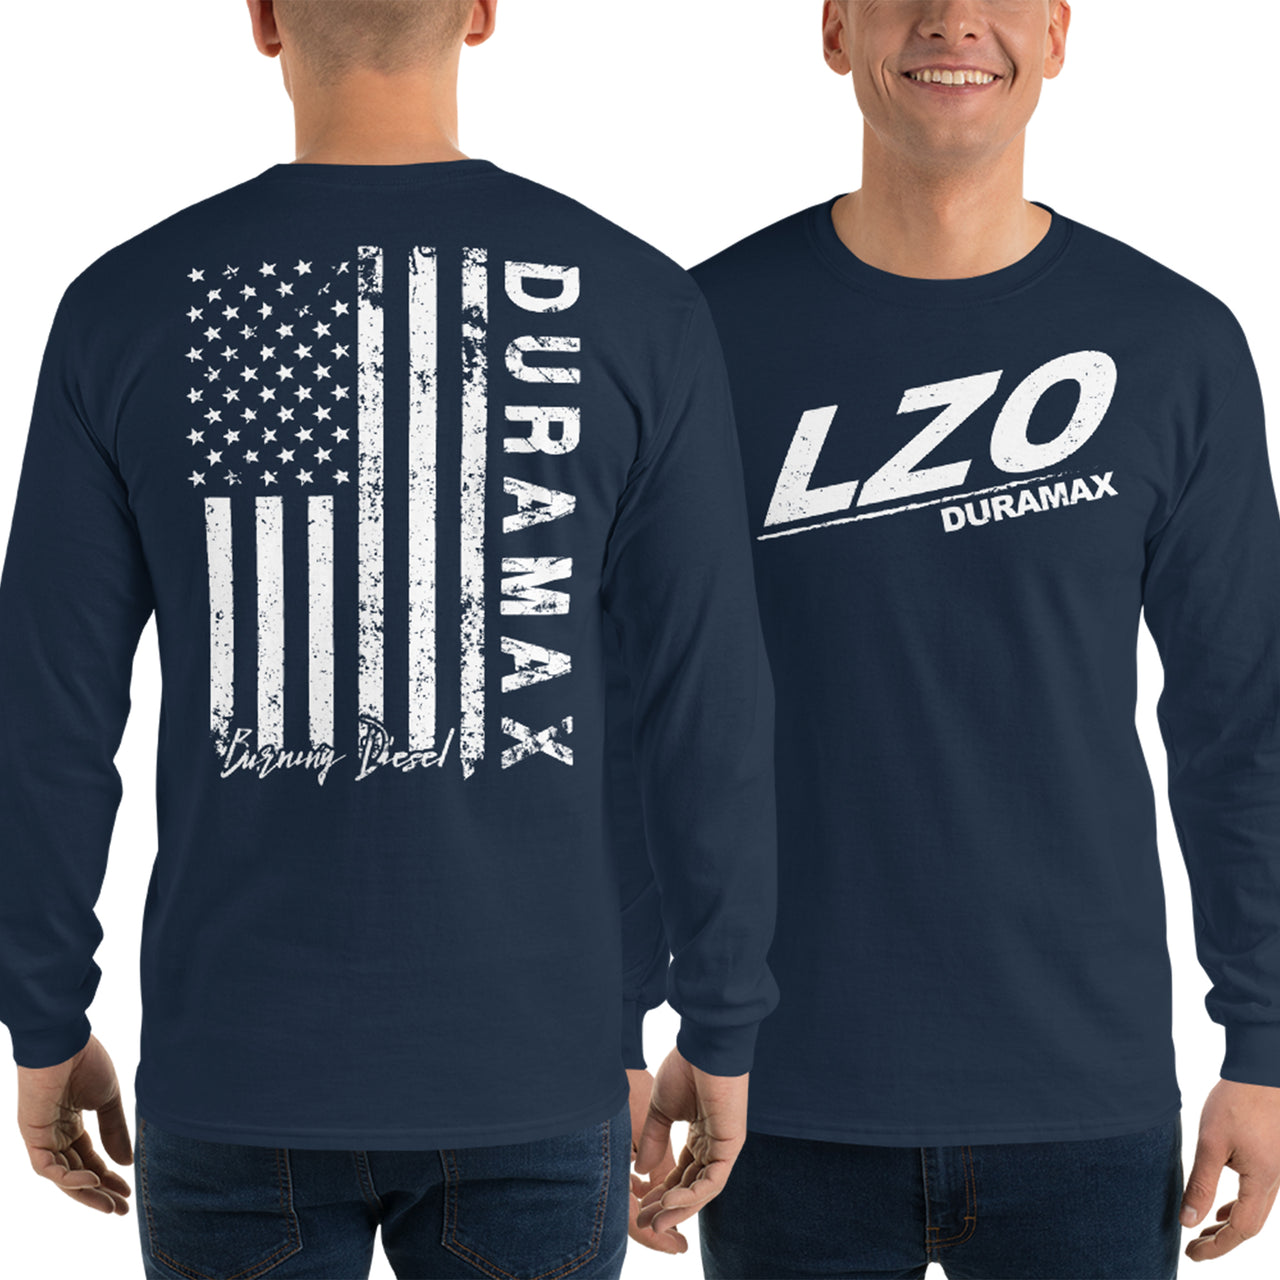 LZO Duramax Long Sleeve Shirt With American Flag Design modeled in navy